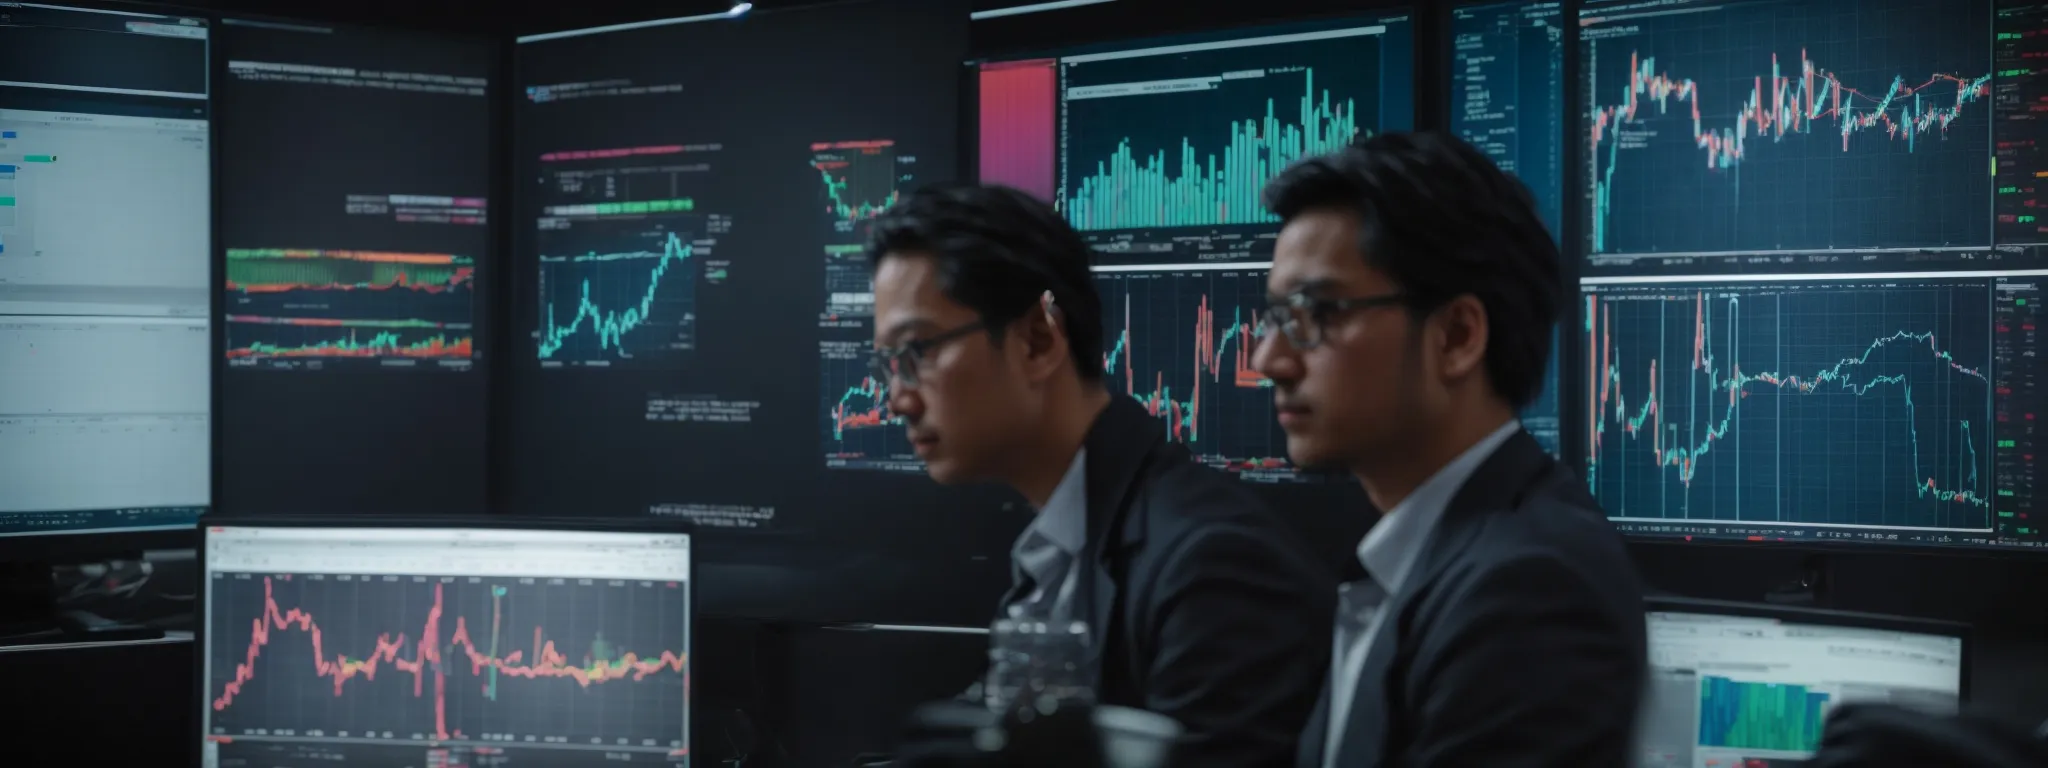 a strategic analyst gazes intently at a large monitor displaying colorful graphs and data analytics related to seo performance.